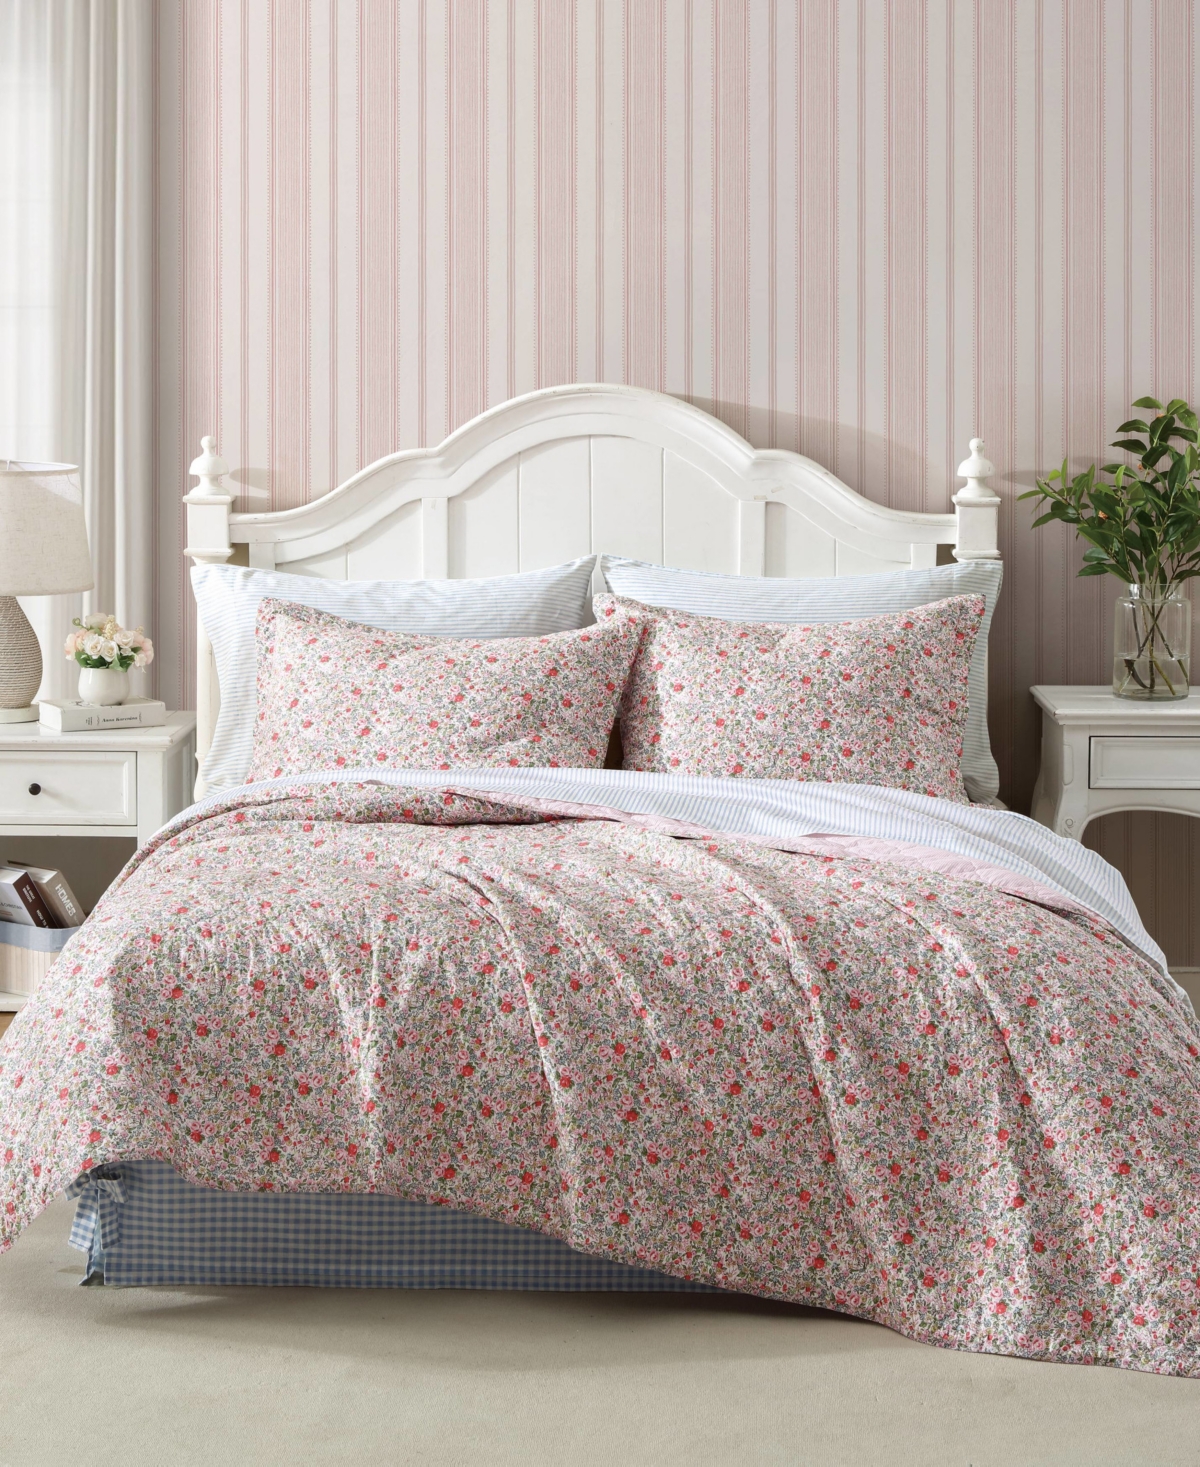 Laura Ashley Rowena Cotton Reversible Quilt, King In Cherry Pink